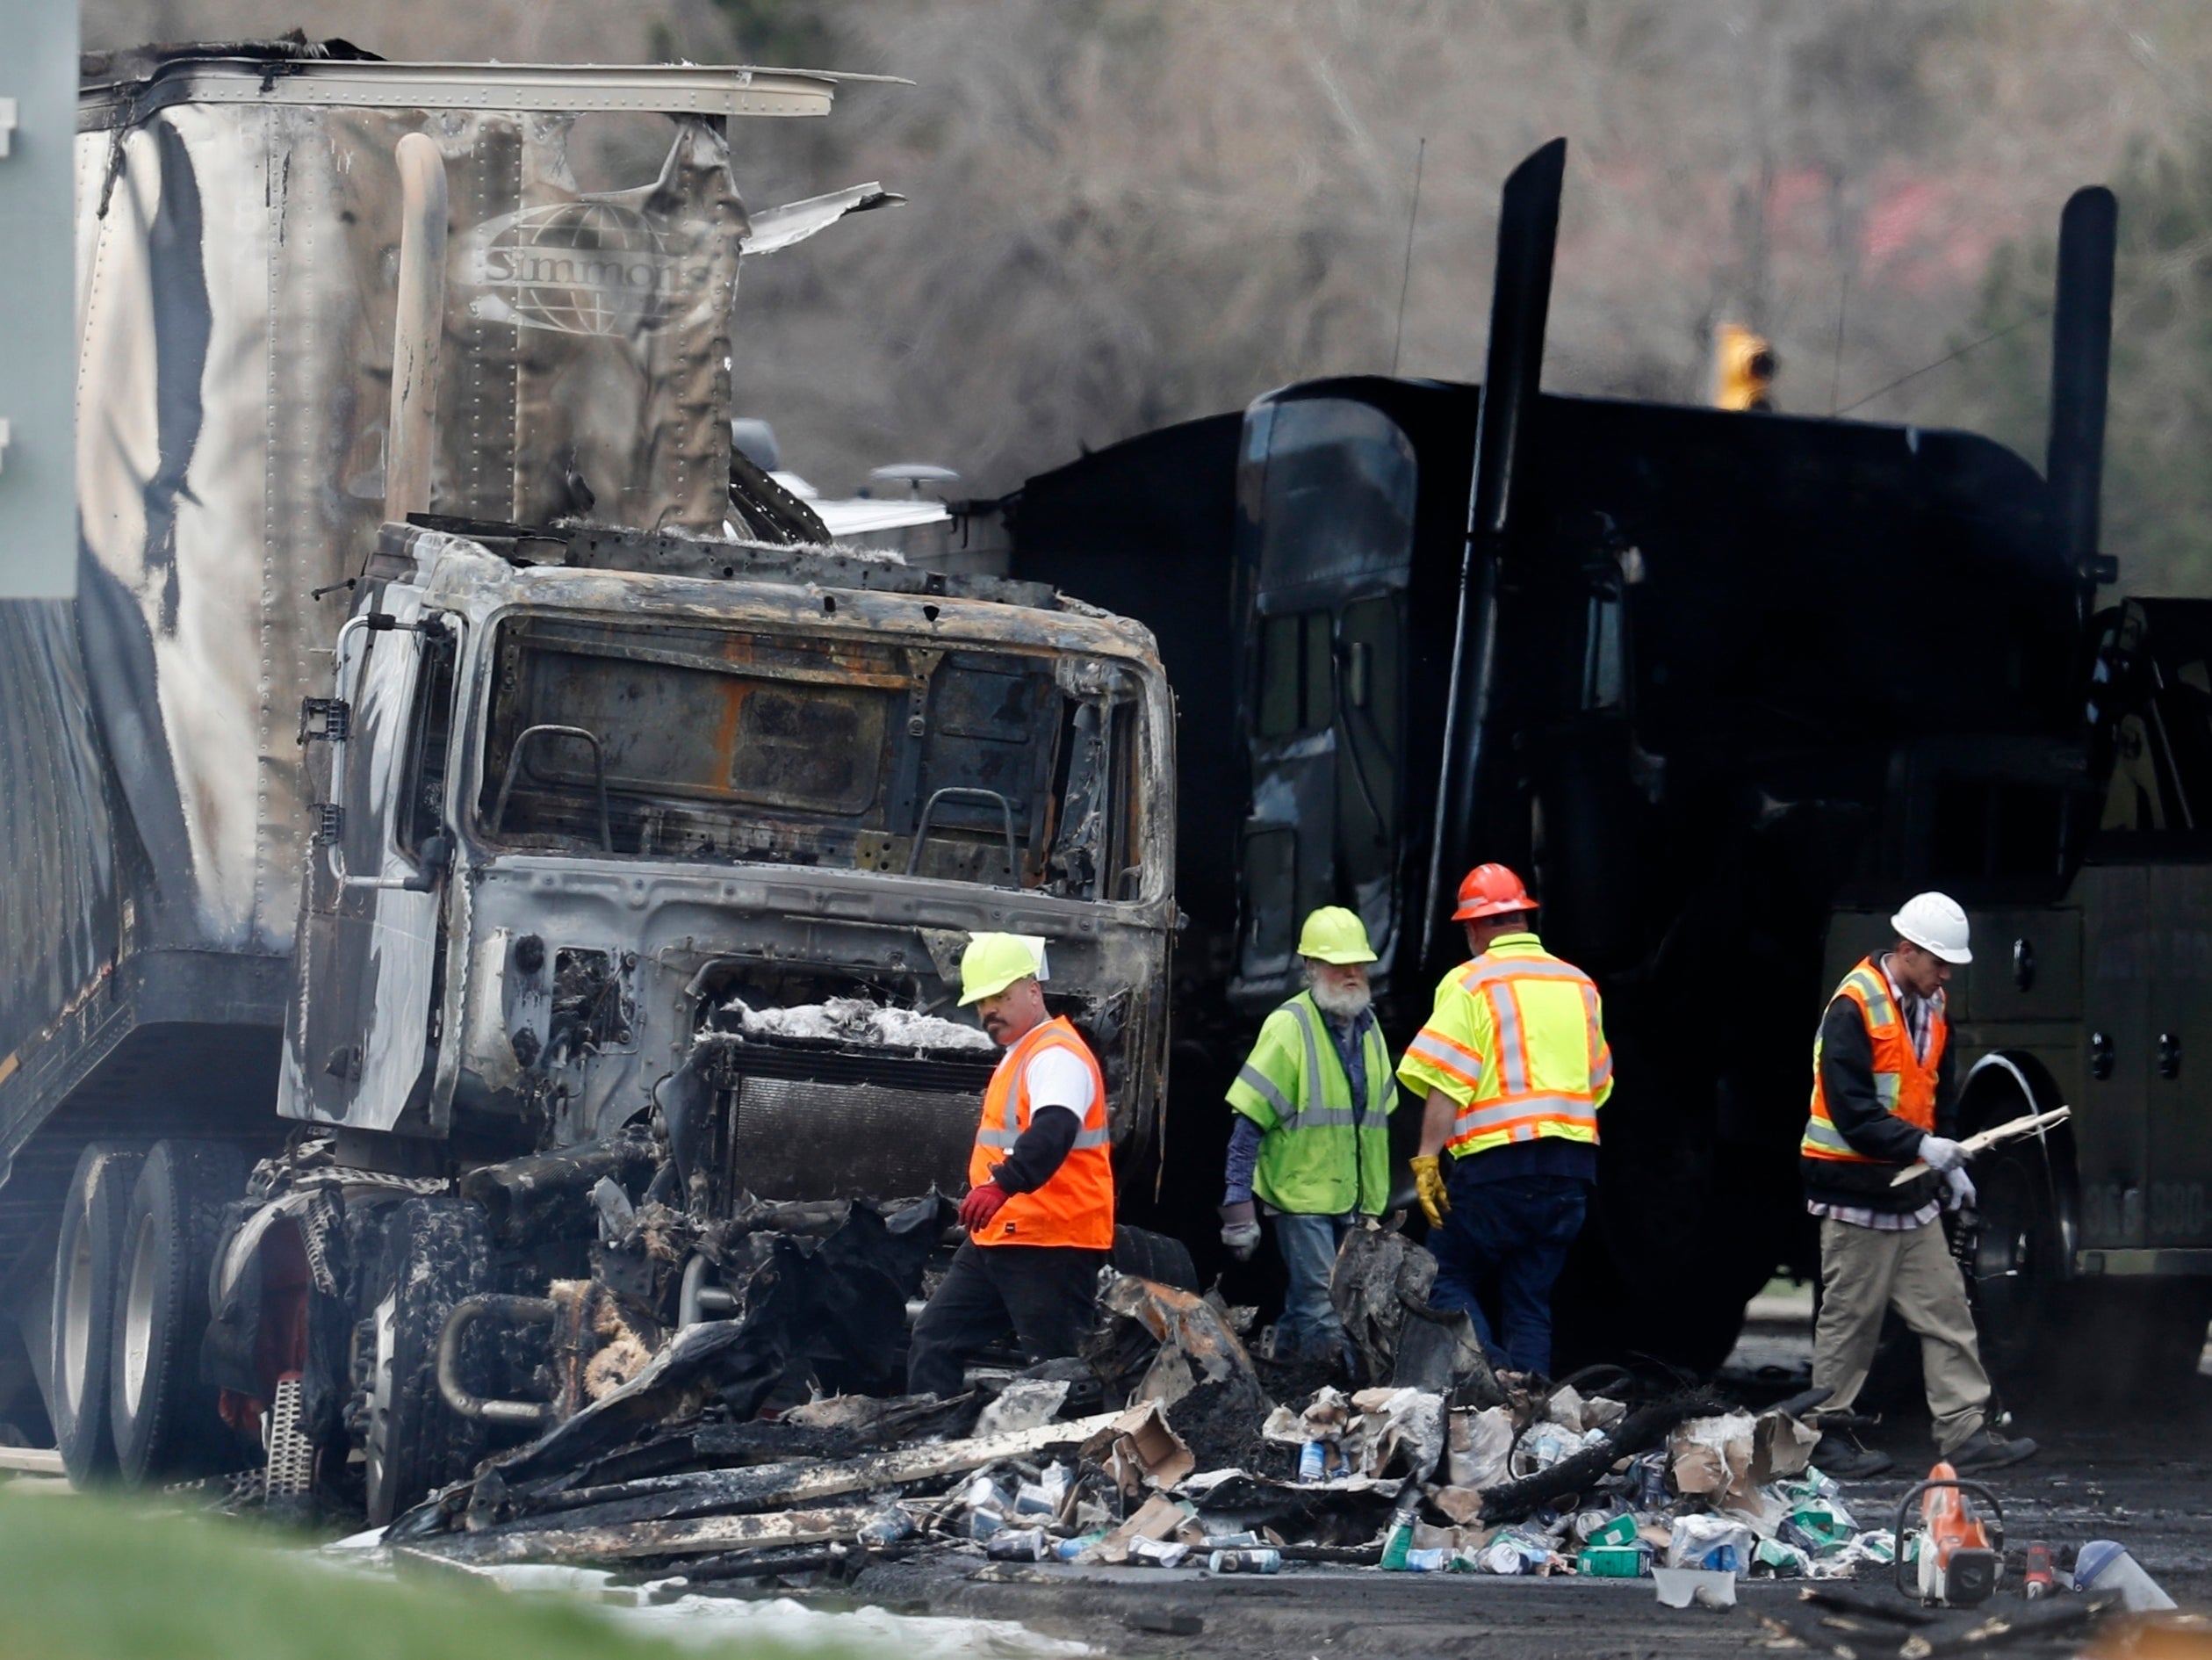 The aftermath of the fiery crash on Interstate 70 in Colorado in April 2019